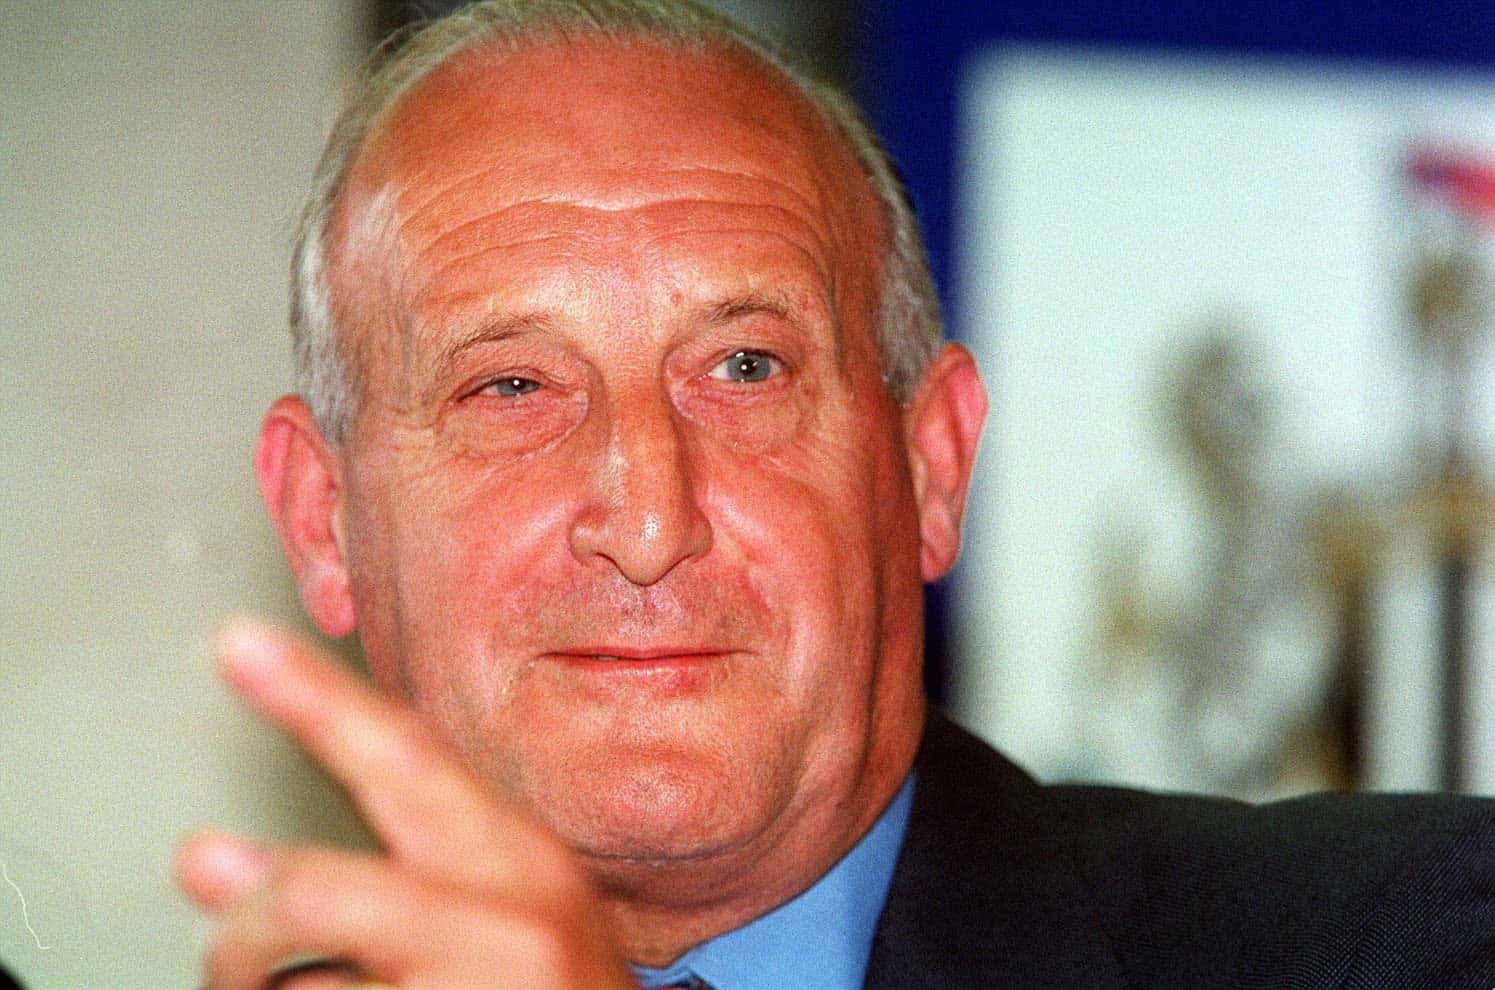 Ex-Newcastle United owner Sir John Hall switches support from Tories to Reform